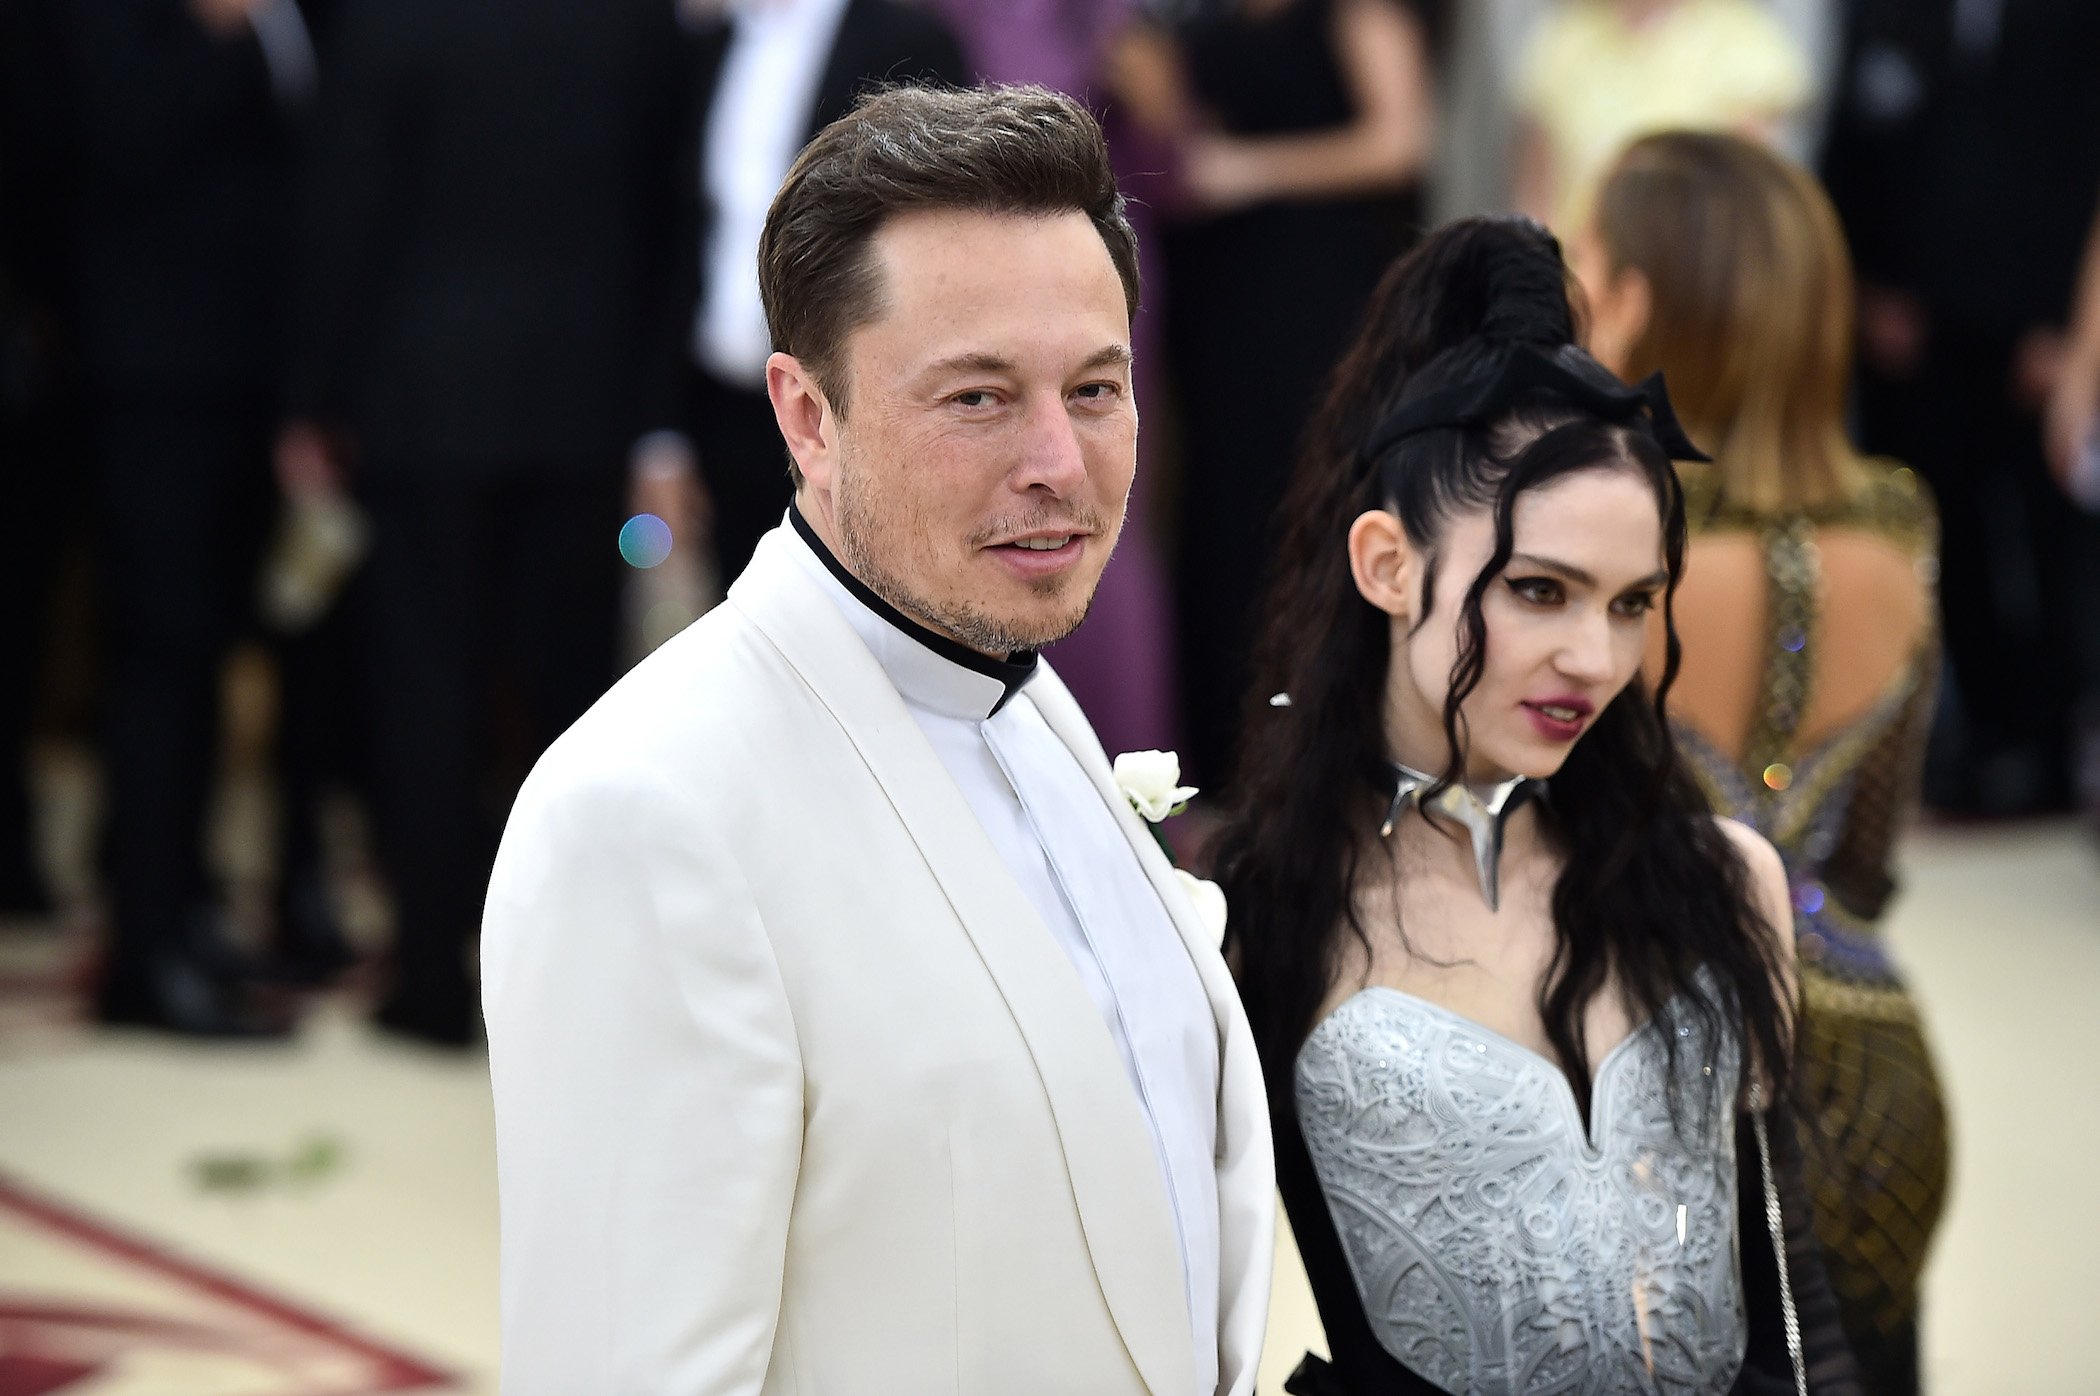 Elon Musk and Grimes attend the Metropolitan Museum of Arts gala